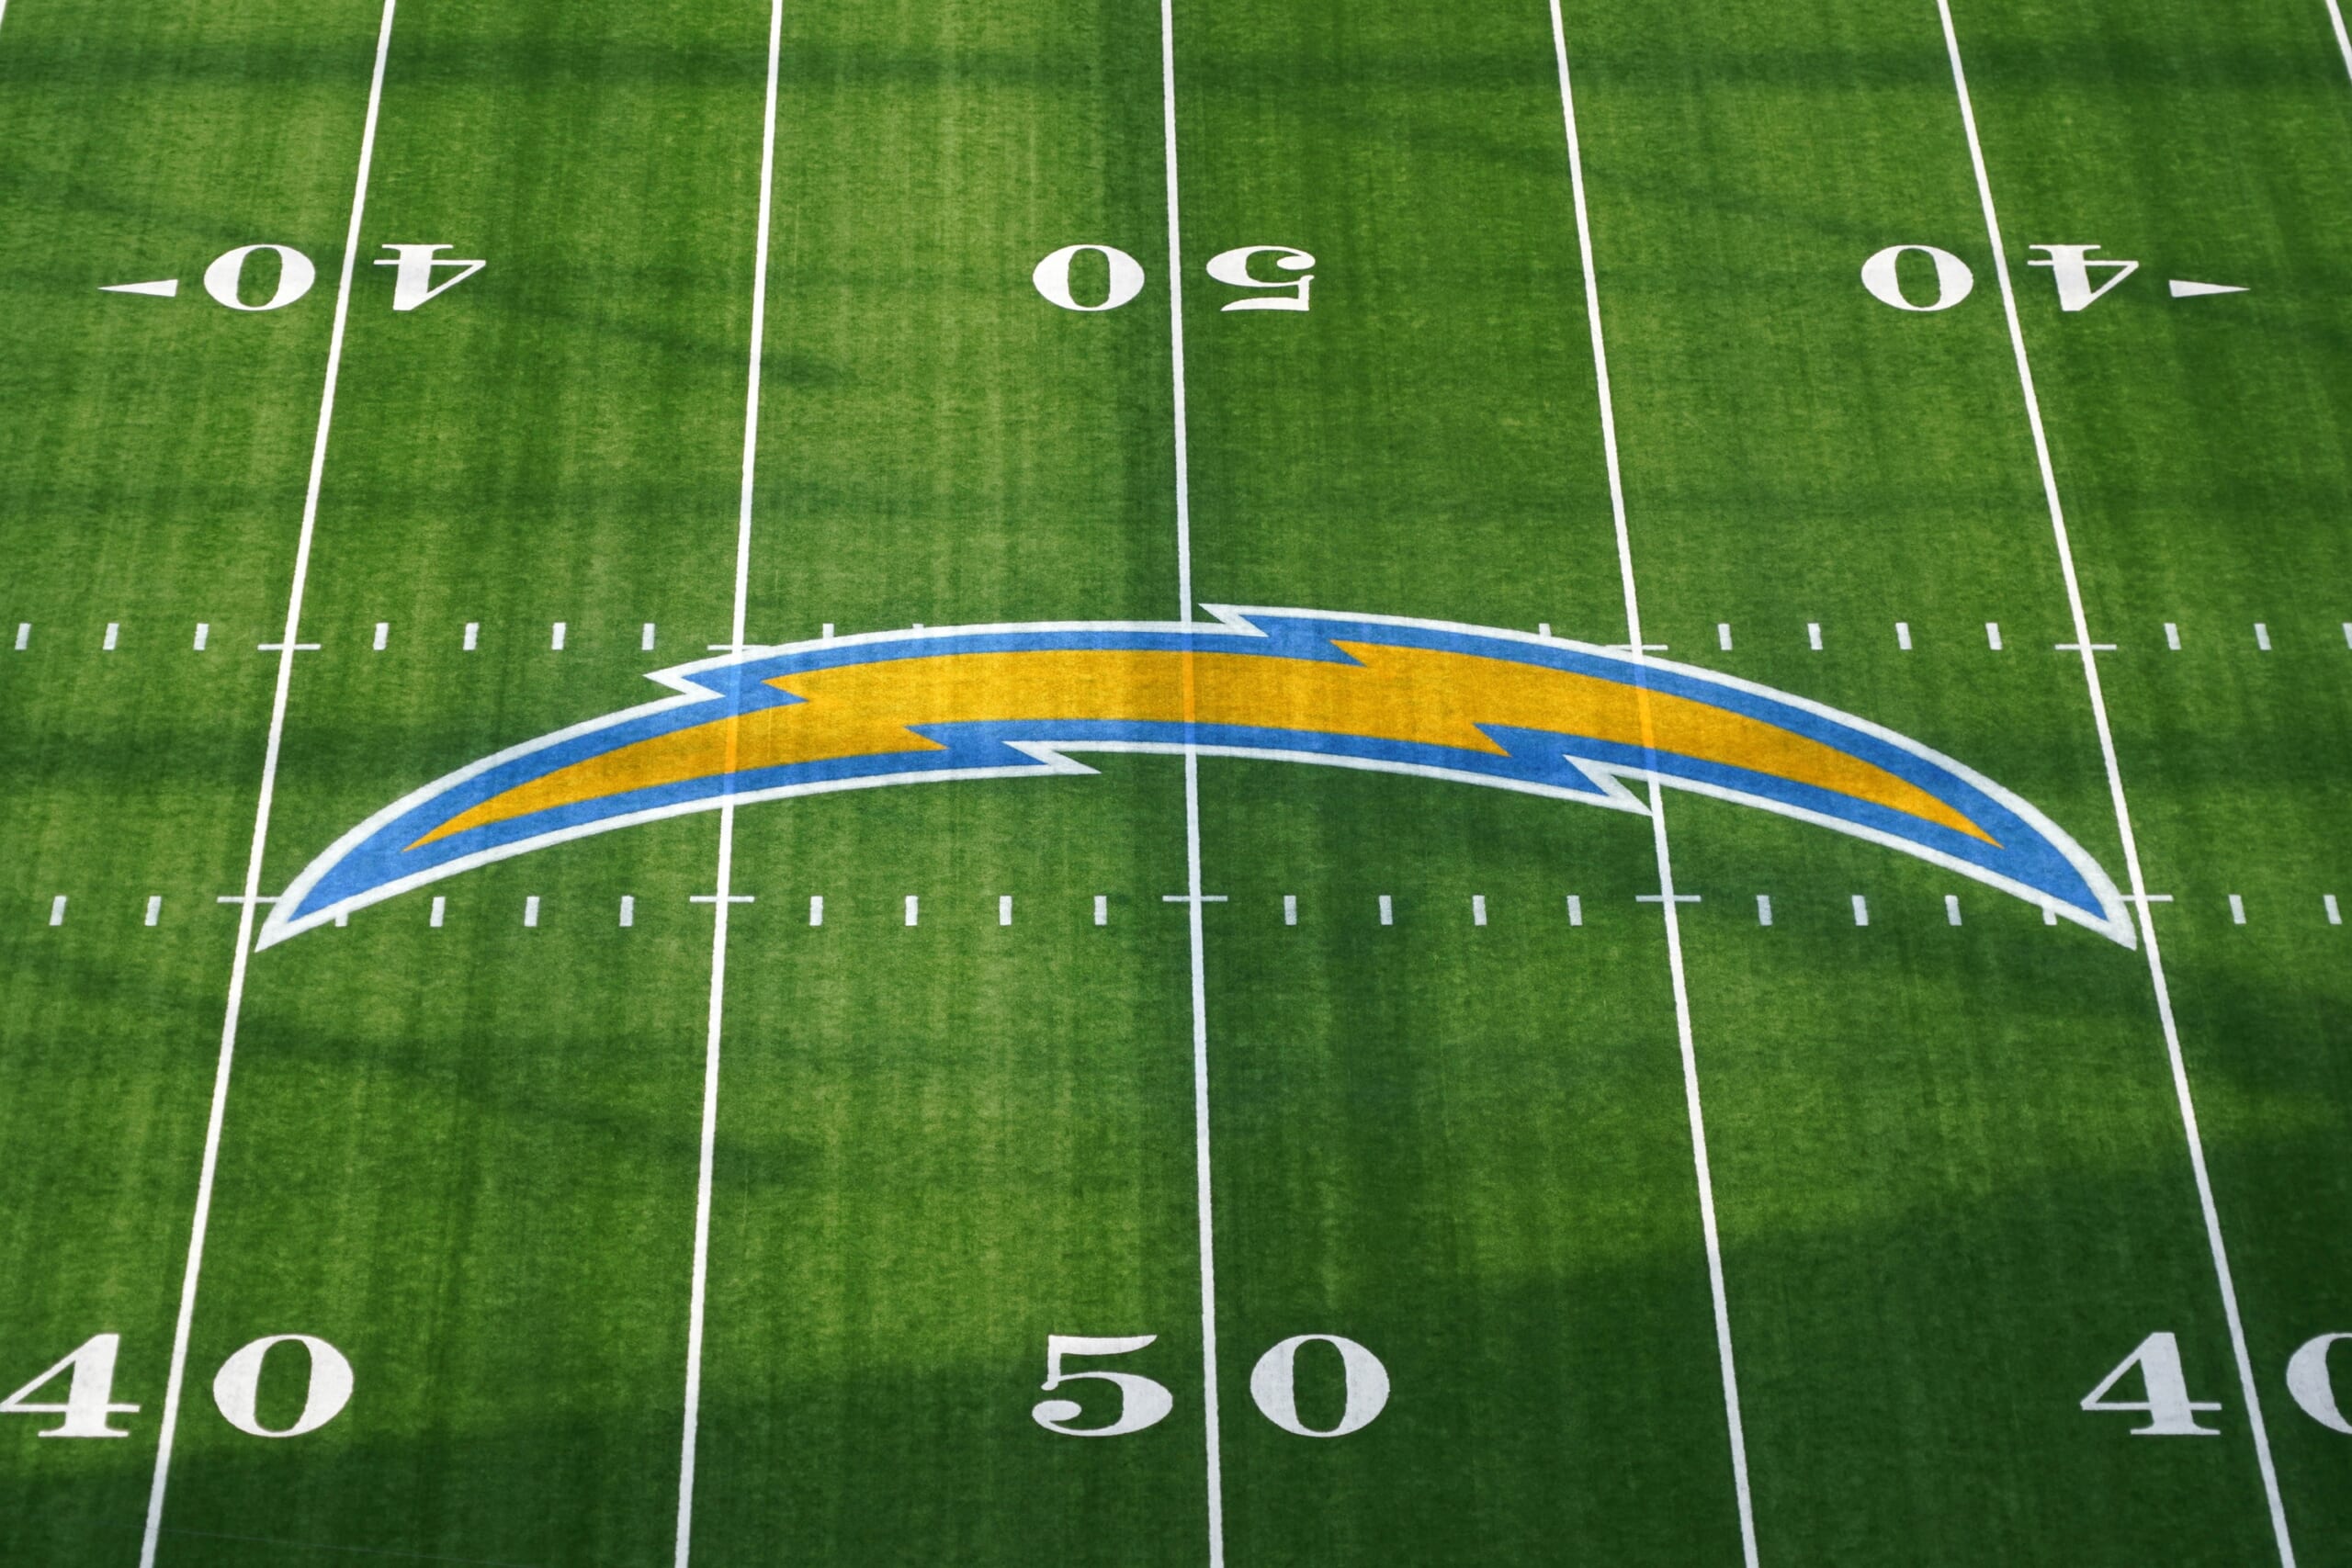 La Chargers Schedule 2022 Los Angeles Chargers Schedule: 2022 Opponents